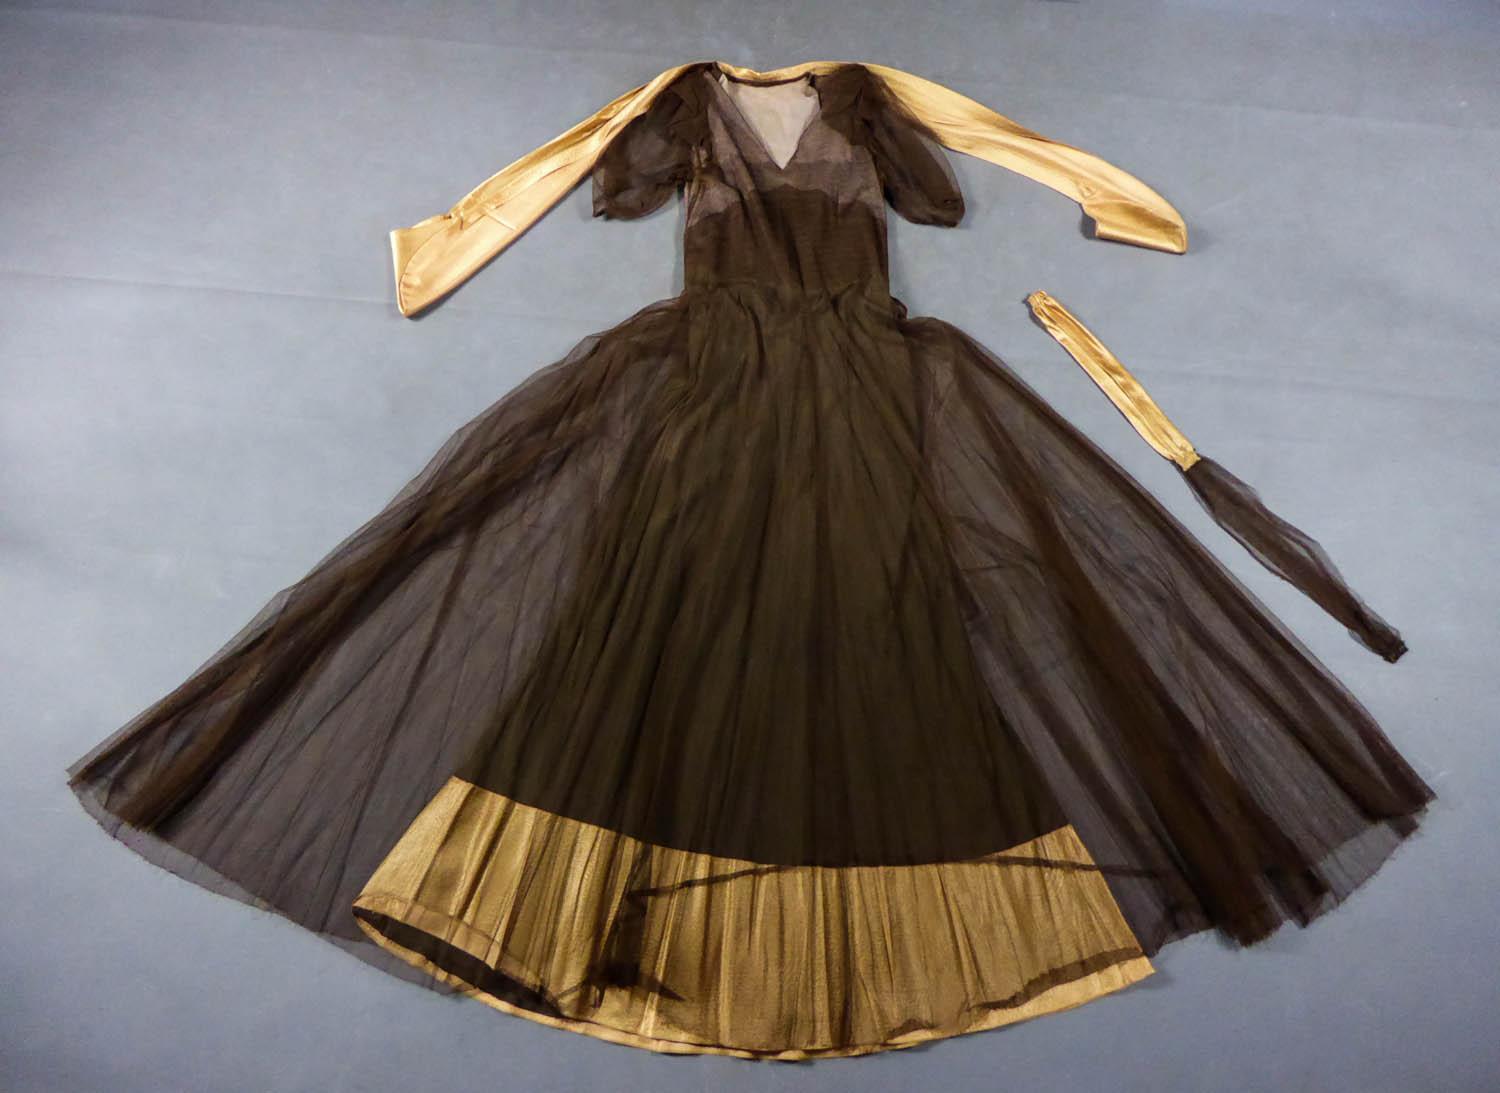 Circa 1930/1940
France

Elegant long evening dress, collector's item, in cotton tulle and gold goffered satin with skin effect dating from the 1930s. Interesting structure with transparency effect: built-in under-dress in brown silk crepe with